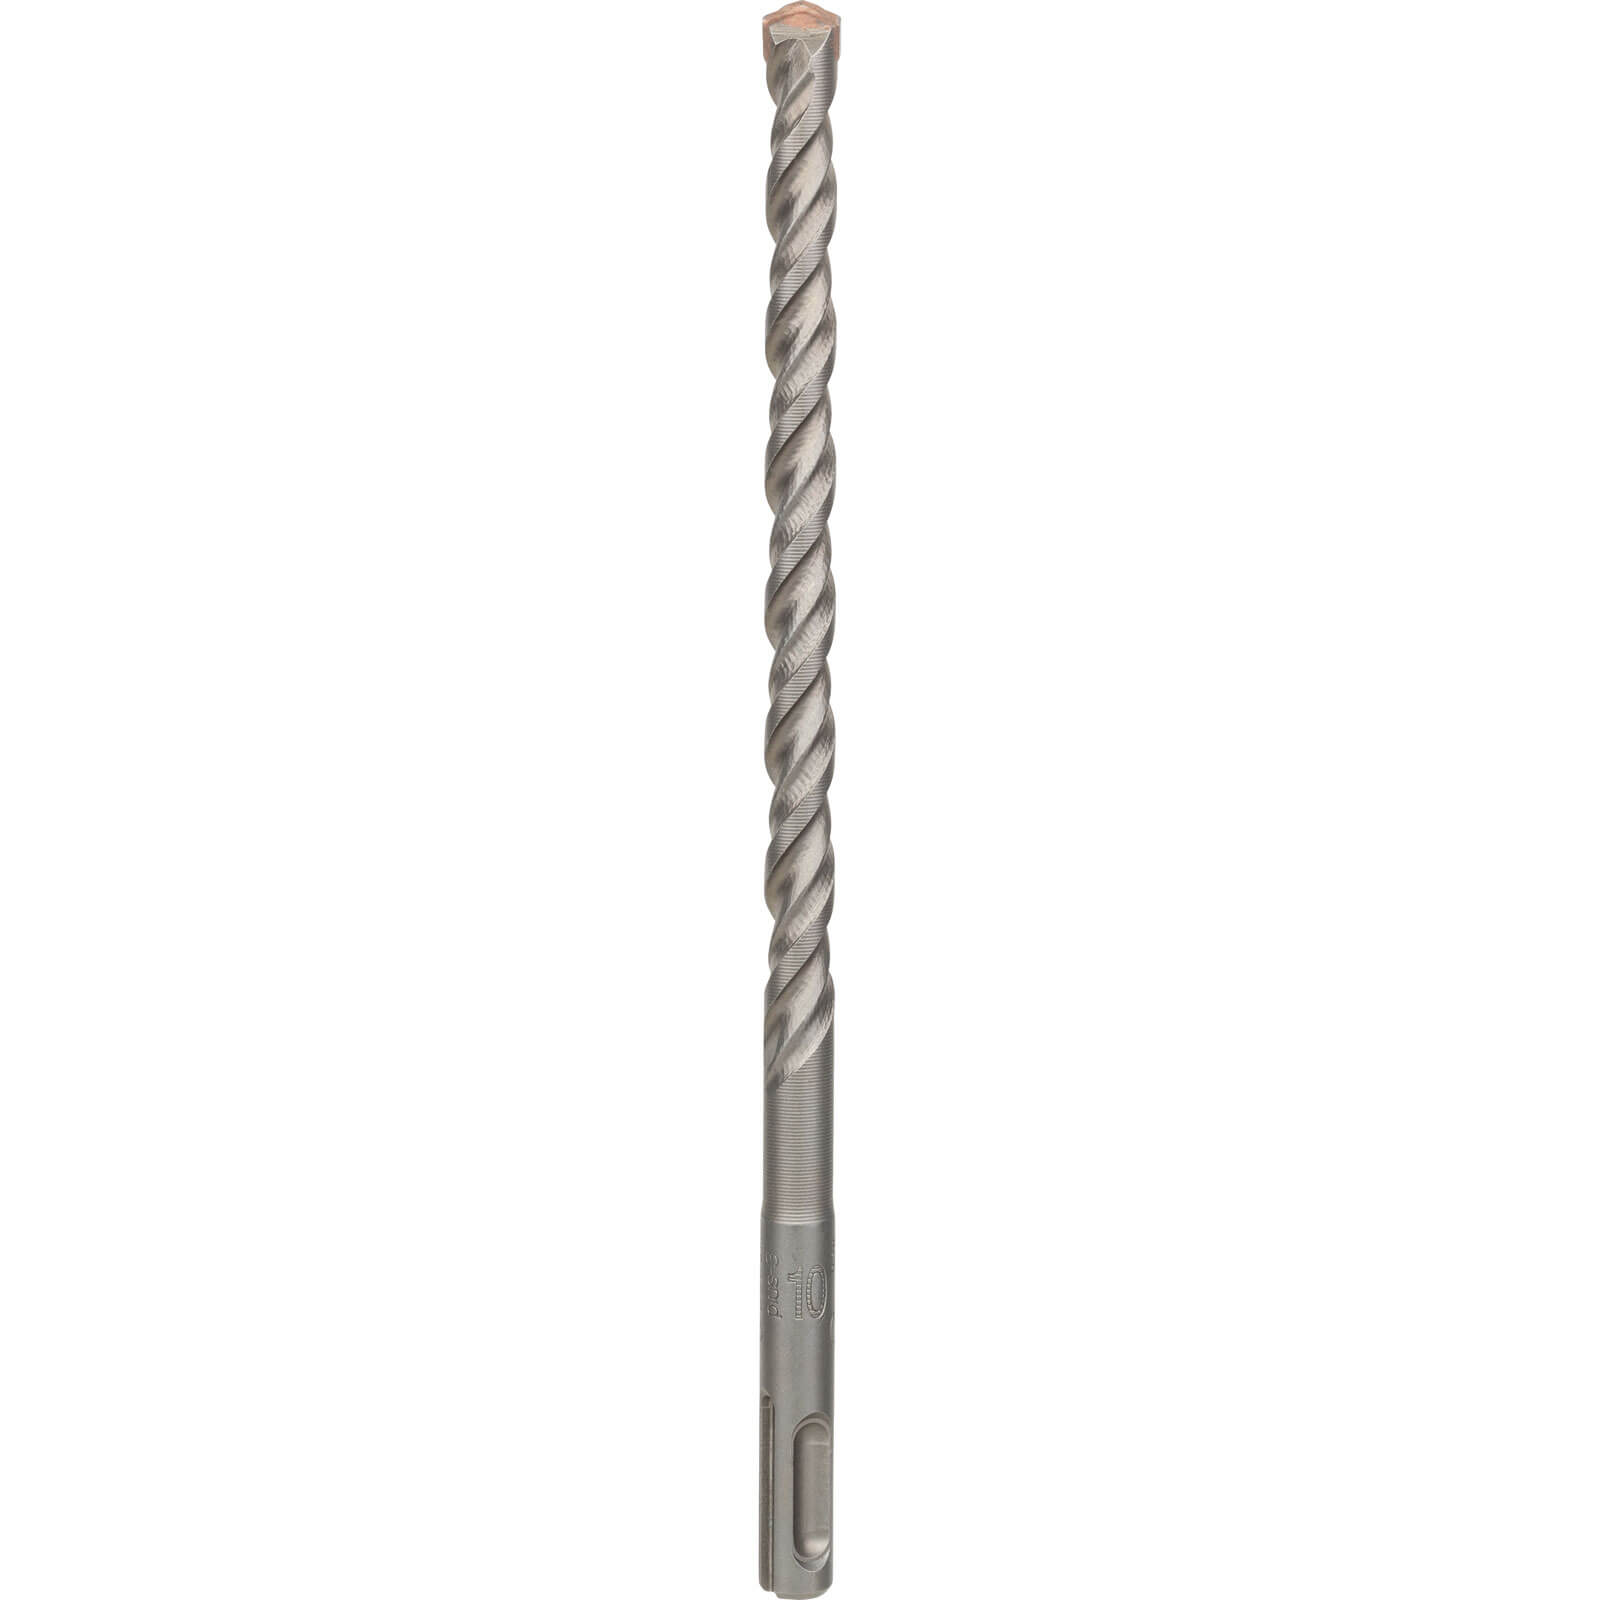 Image of Bosch Series 3 SDS Plus Masonry Drill Bit 10mm 210mm Pack of 1